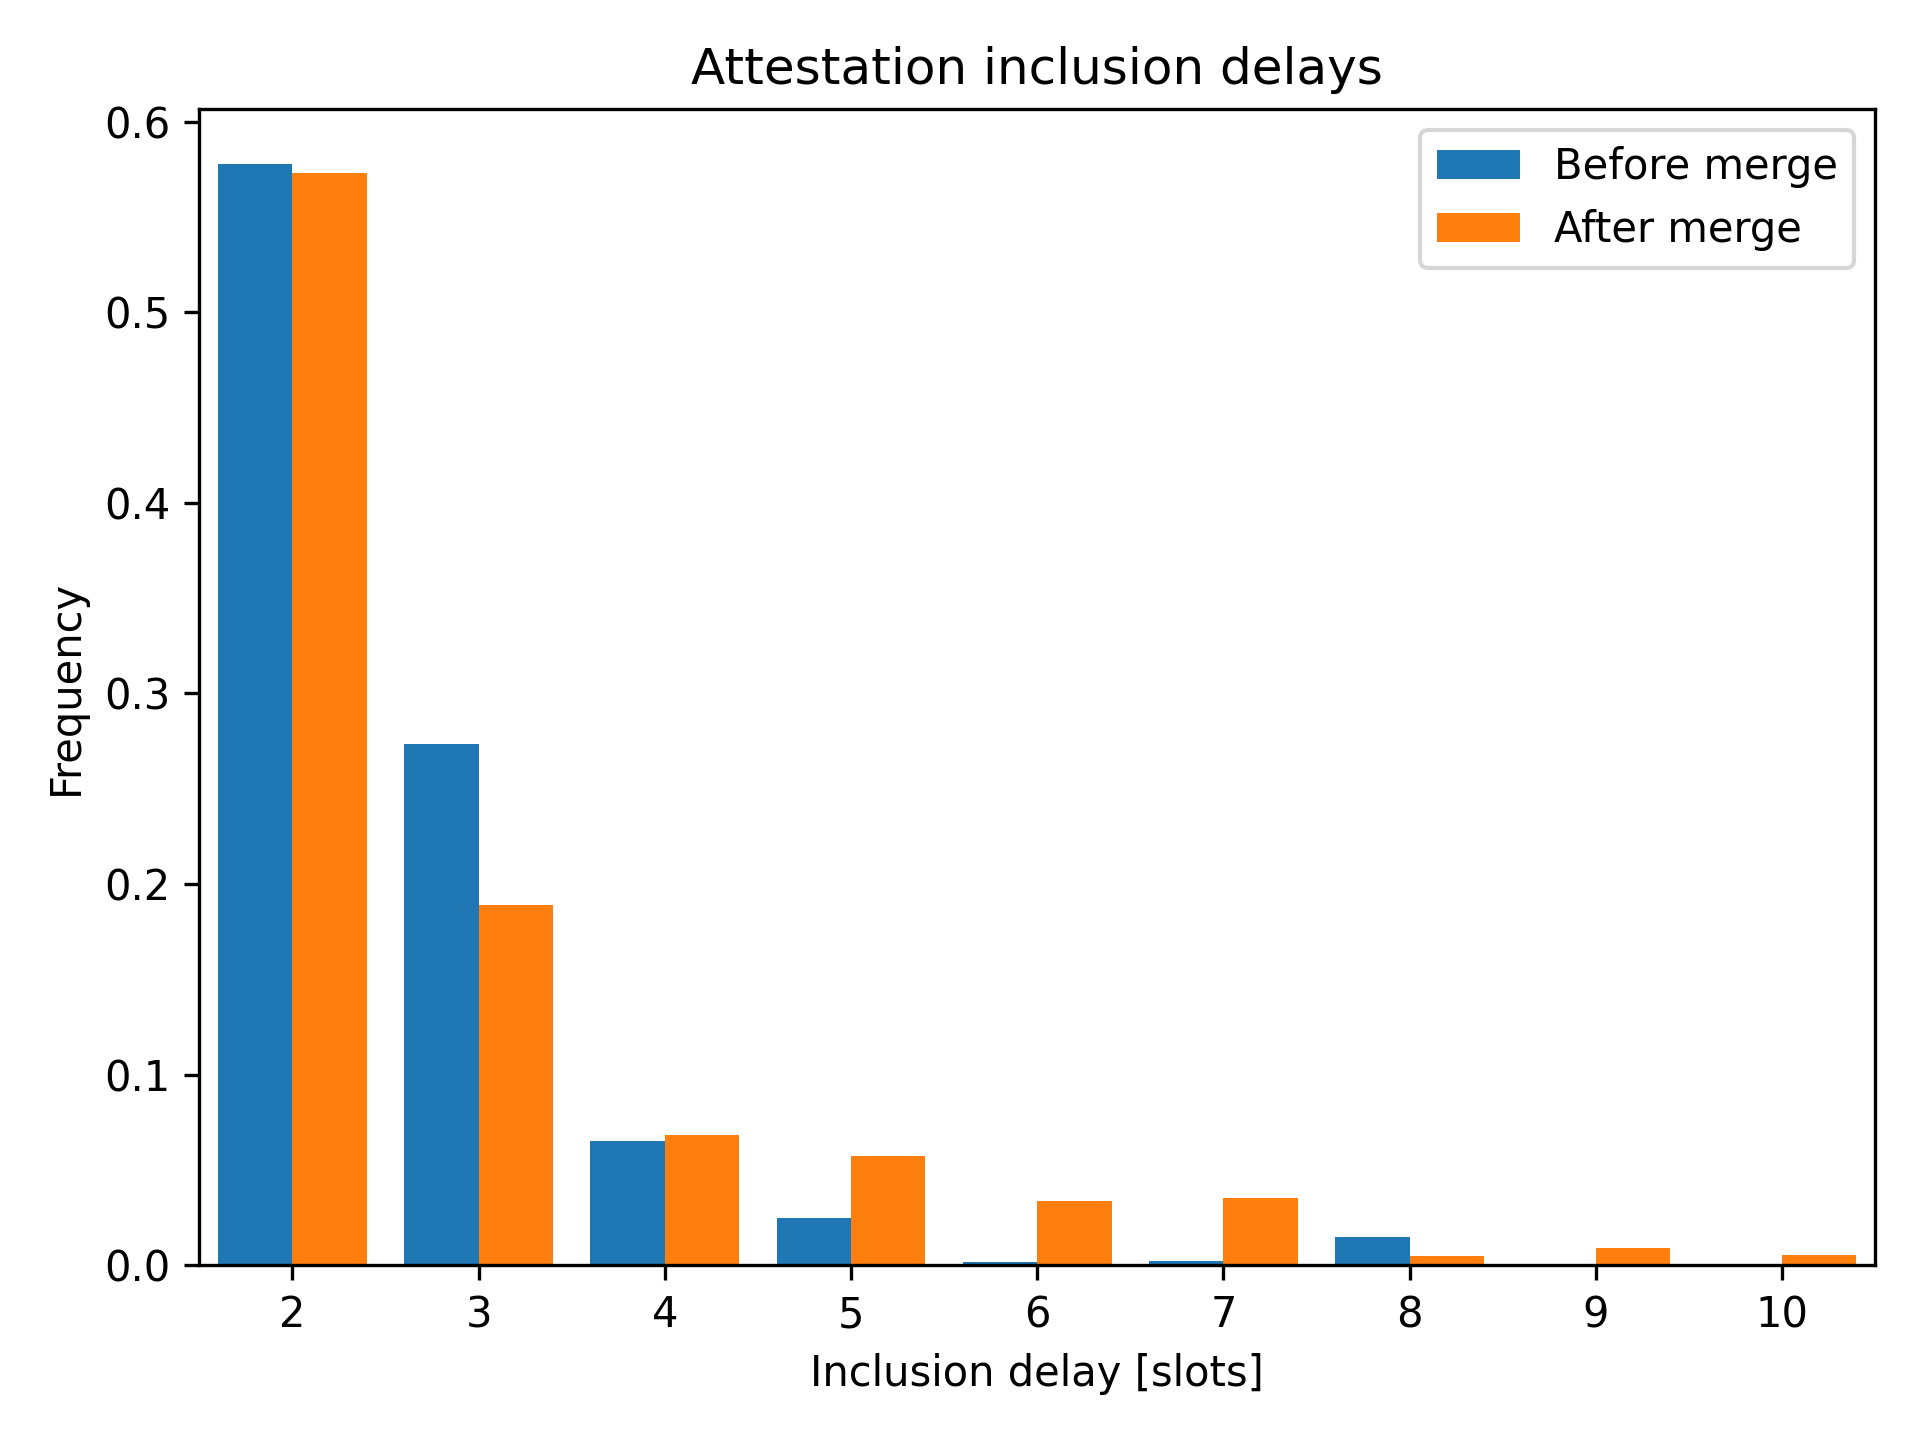 Number of slots between the creation and inclusion slot, excluding immediate inclusions (i.e., delay 1).